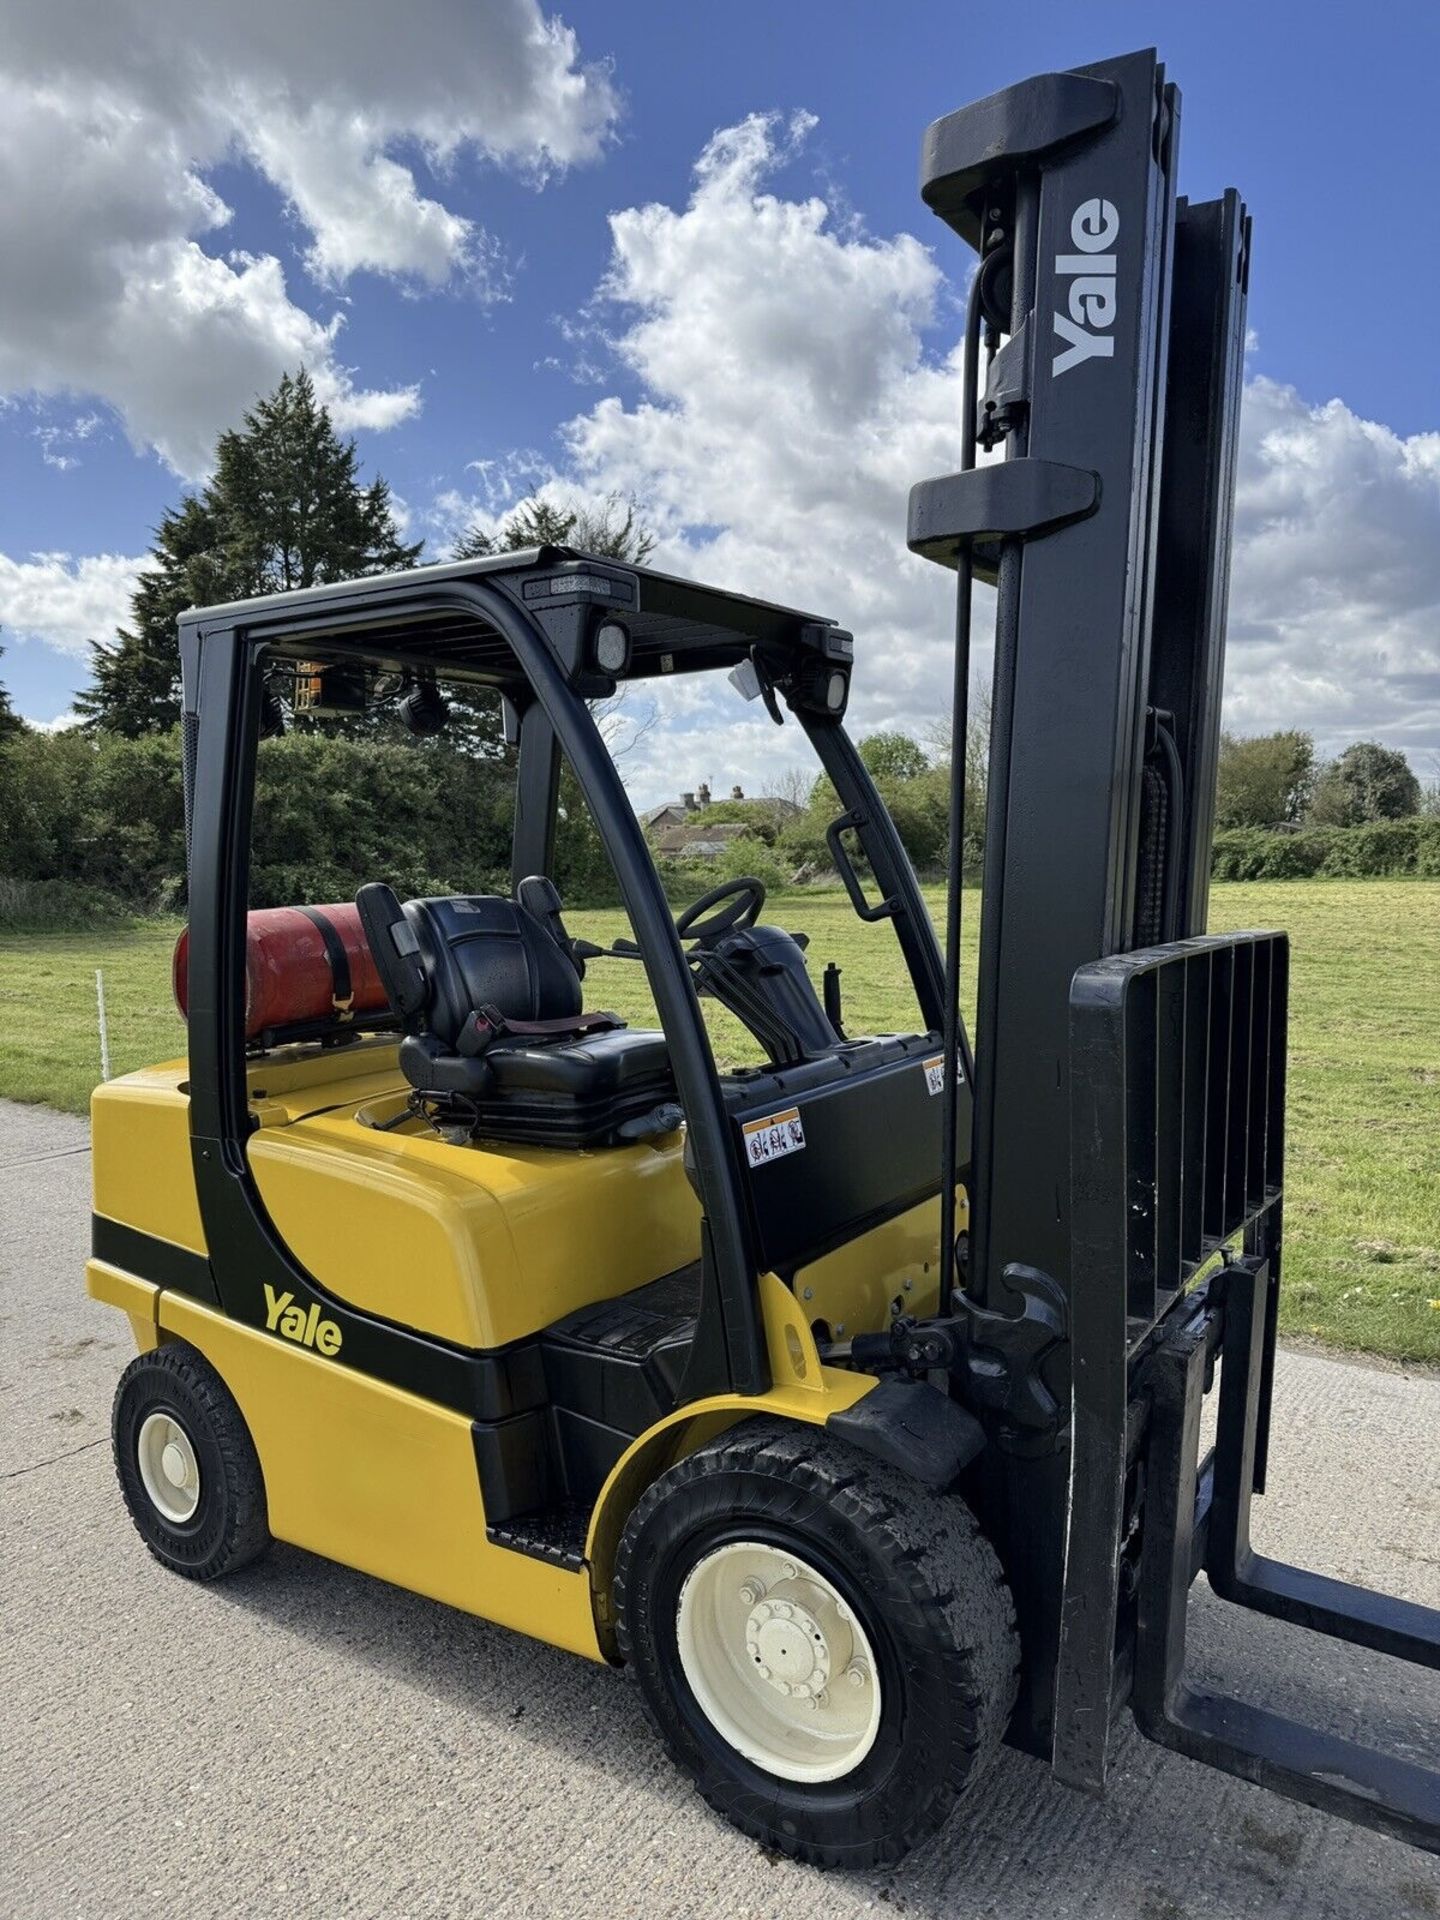 2017 - YALE Gas Forklift Truck (5.9 m lift) - Only 2200 Hours - Image 3 of 7